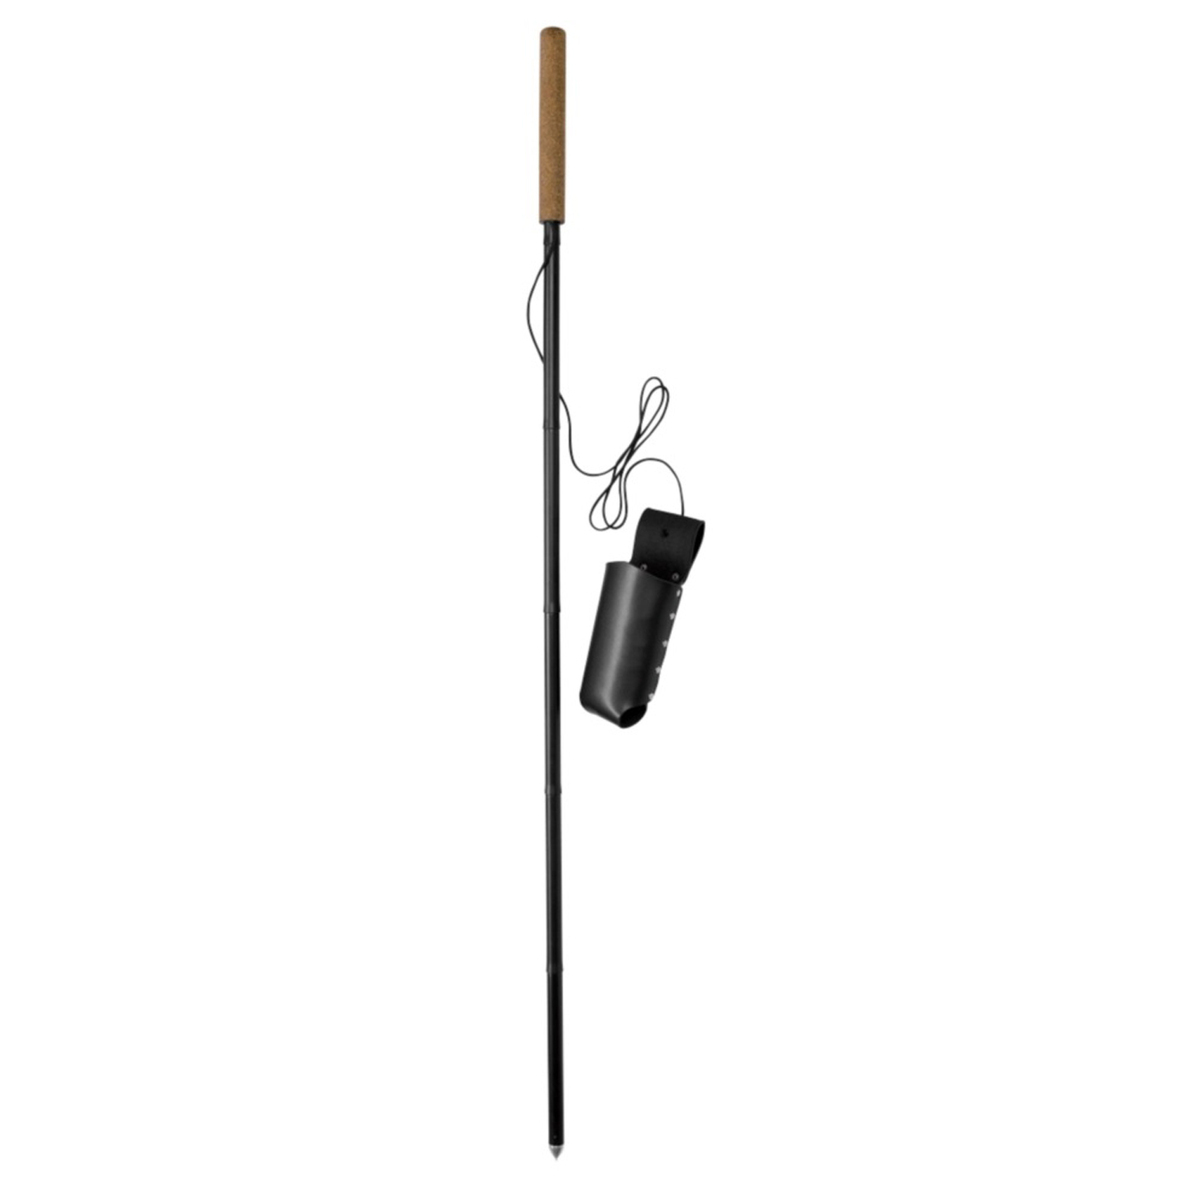 Orvis Sure Step Folding Wading Staff Fly Fishing Accessory - 51in